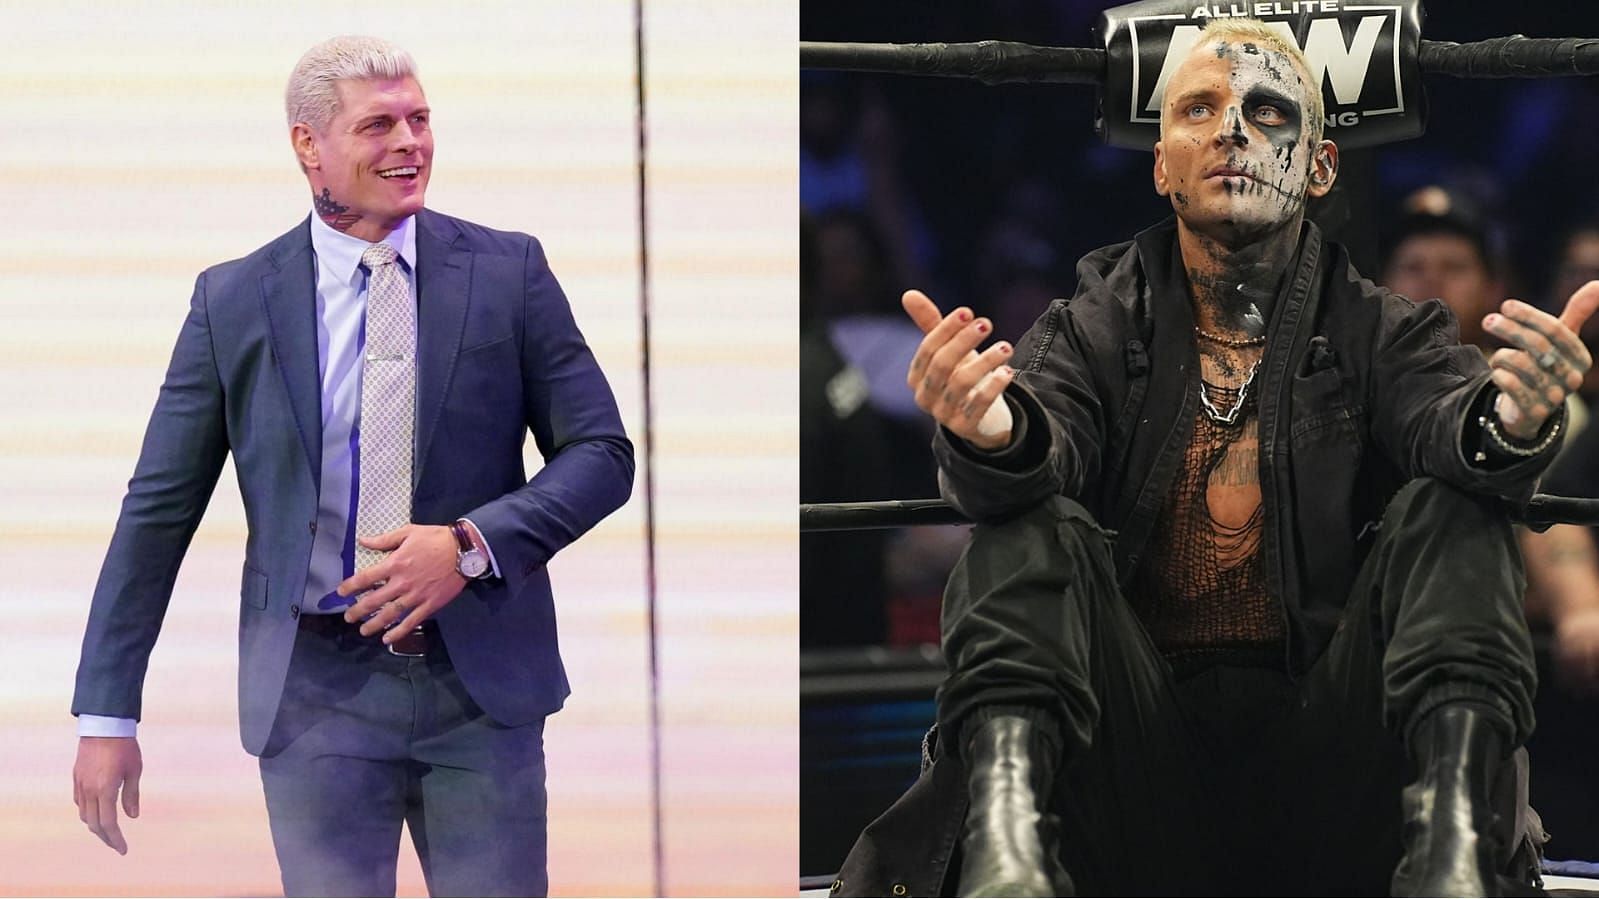 Cody Rhodes and Darby Allin shared ring together in AEW